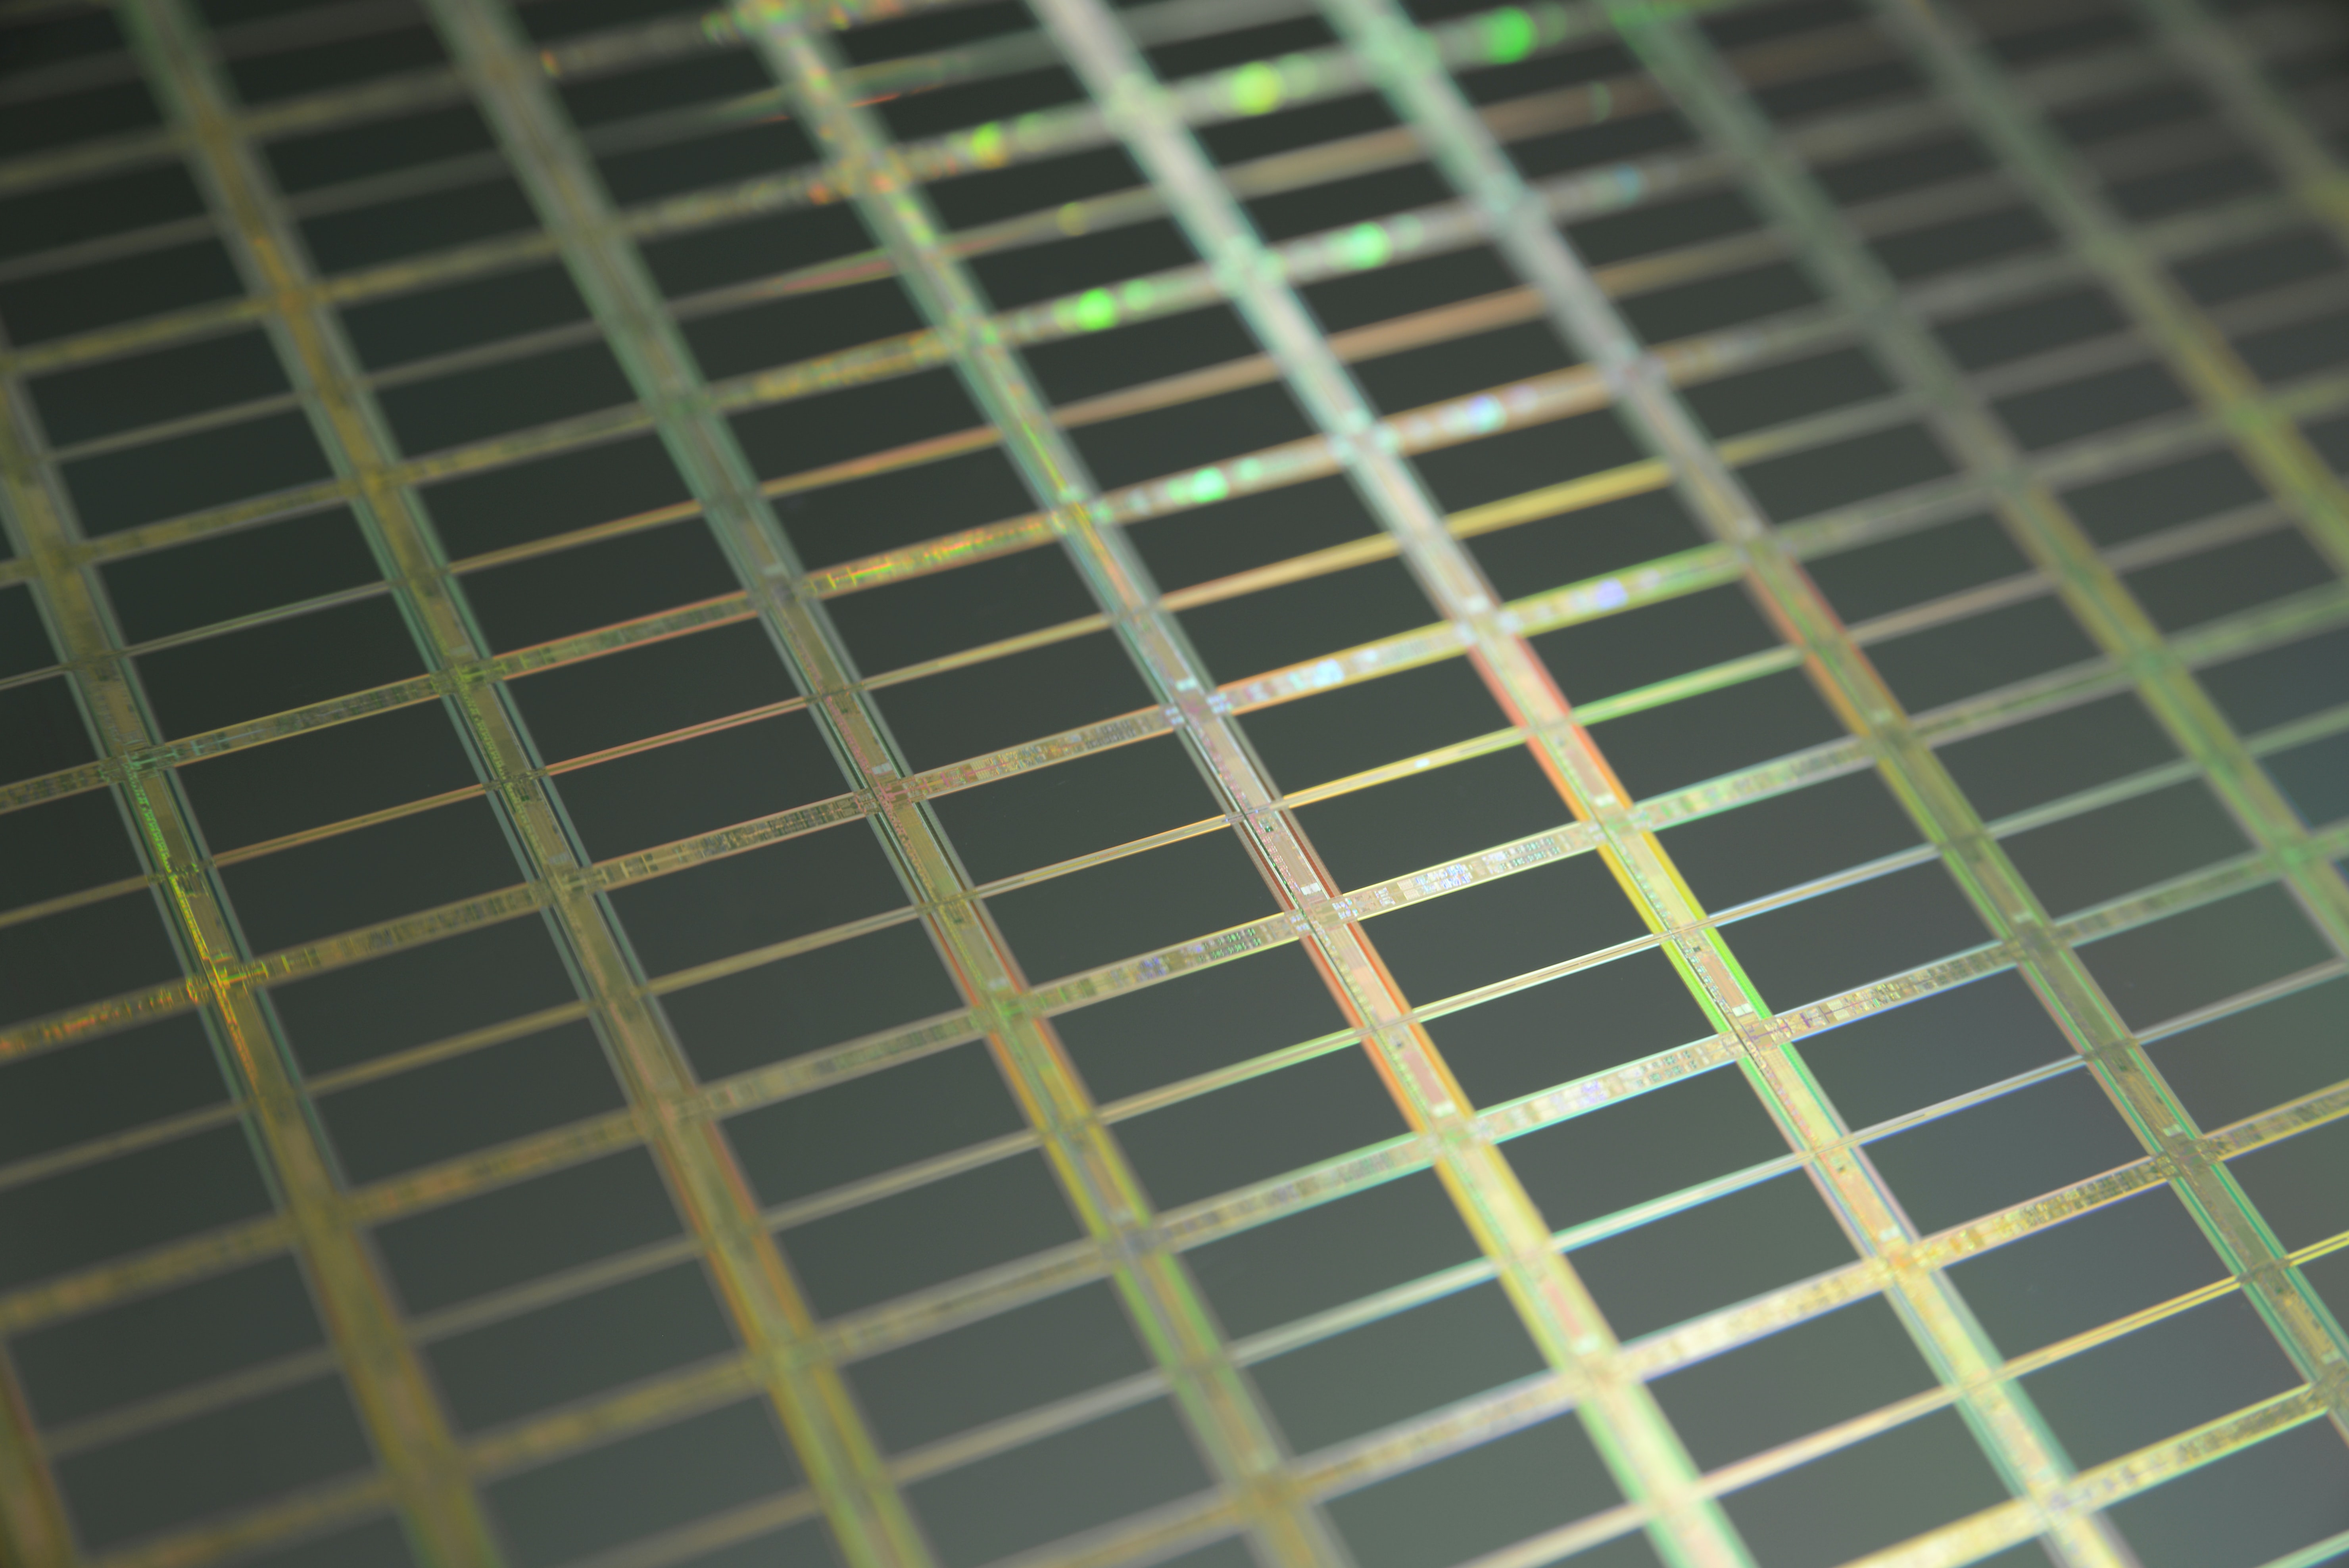 TSMC to Boost Capex in 2022 Driven by 5G Applications, High Performance Computing